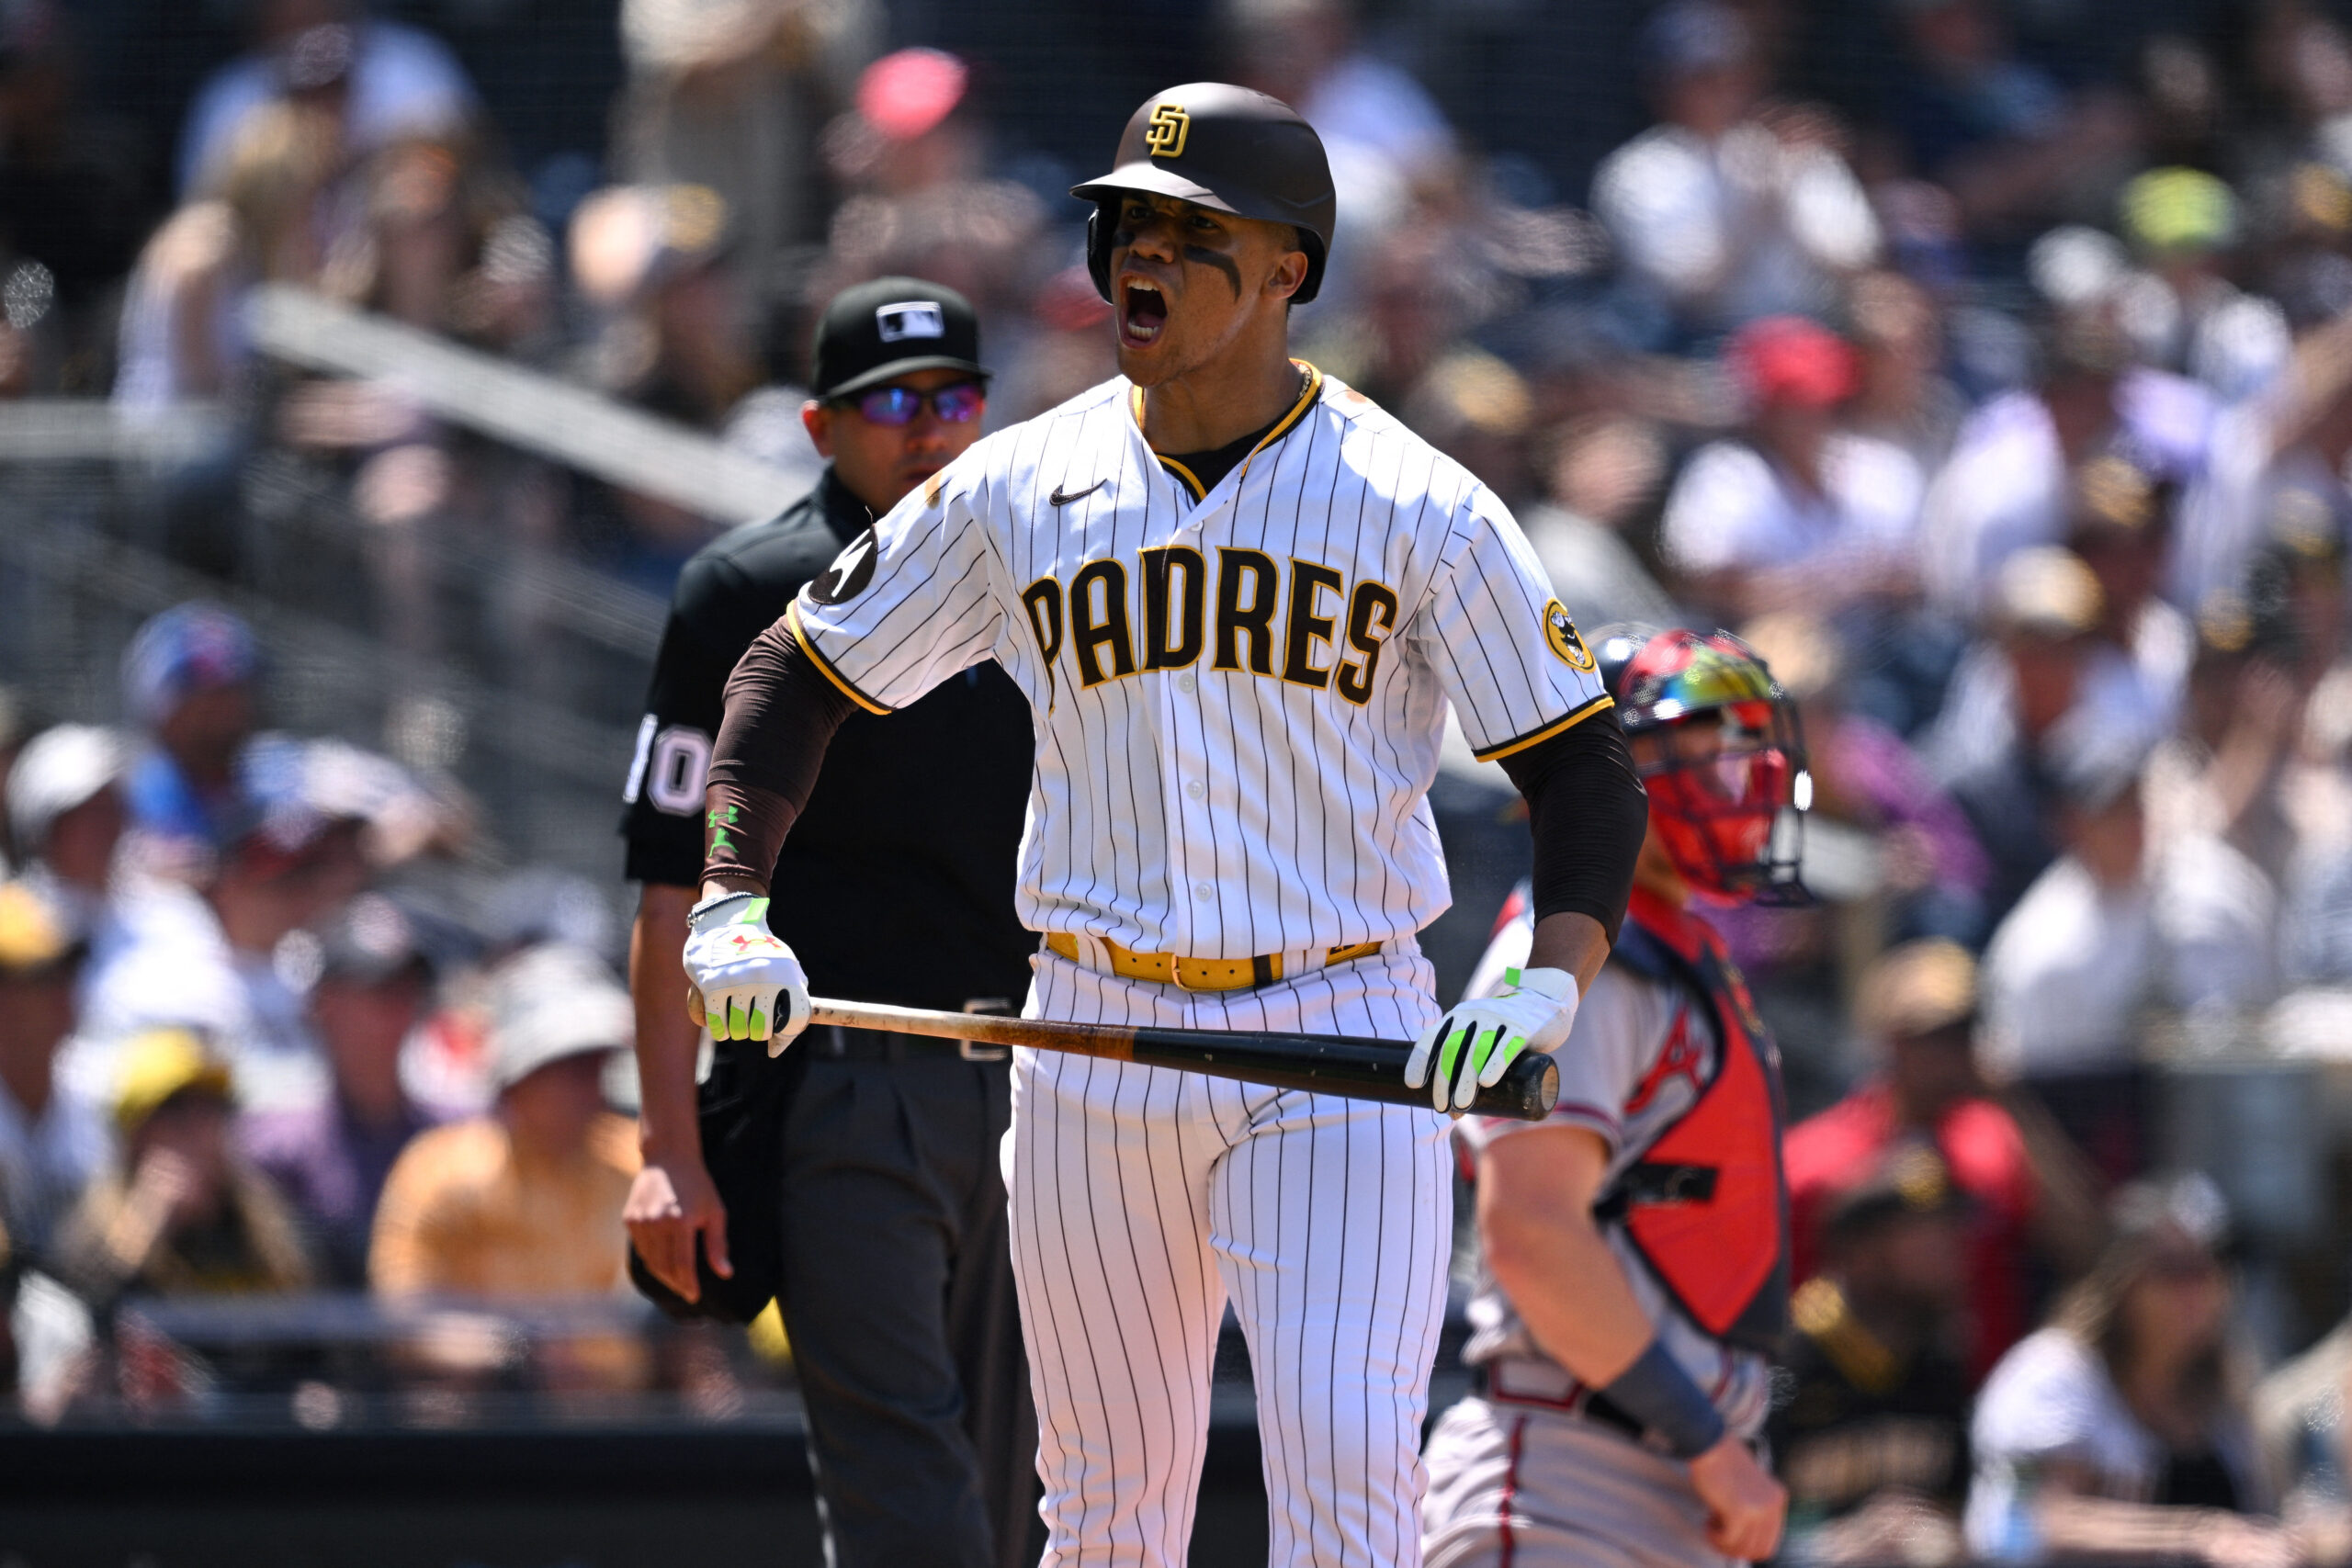 San Diego Padres beat LA Dodgers in 6-1 victory